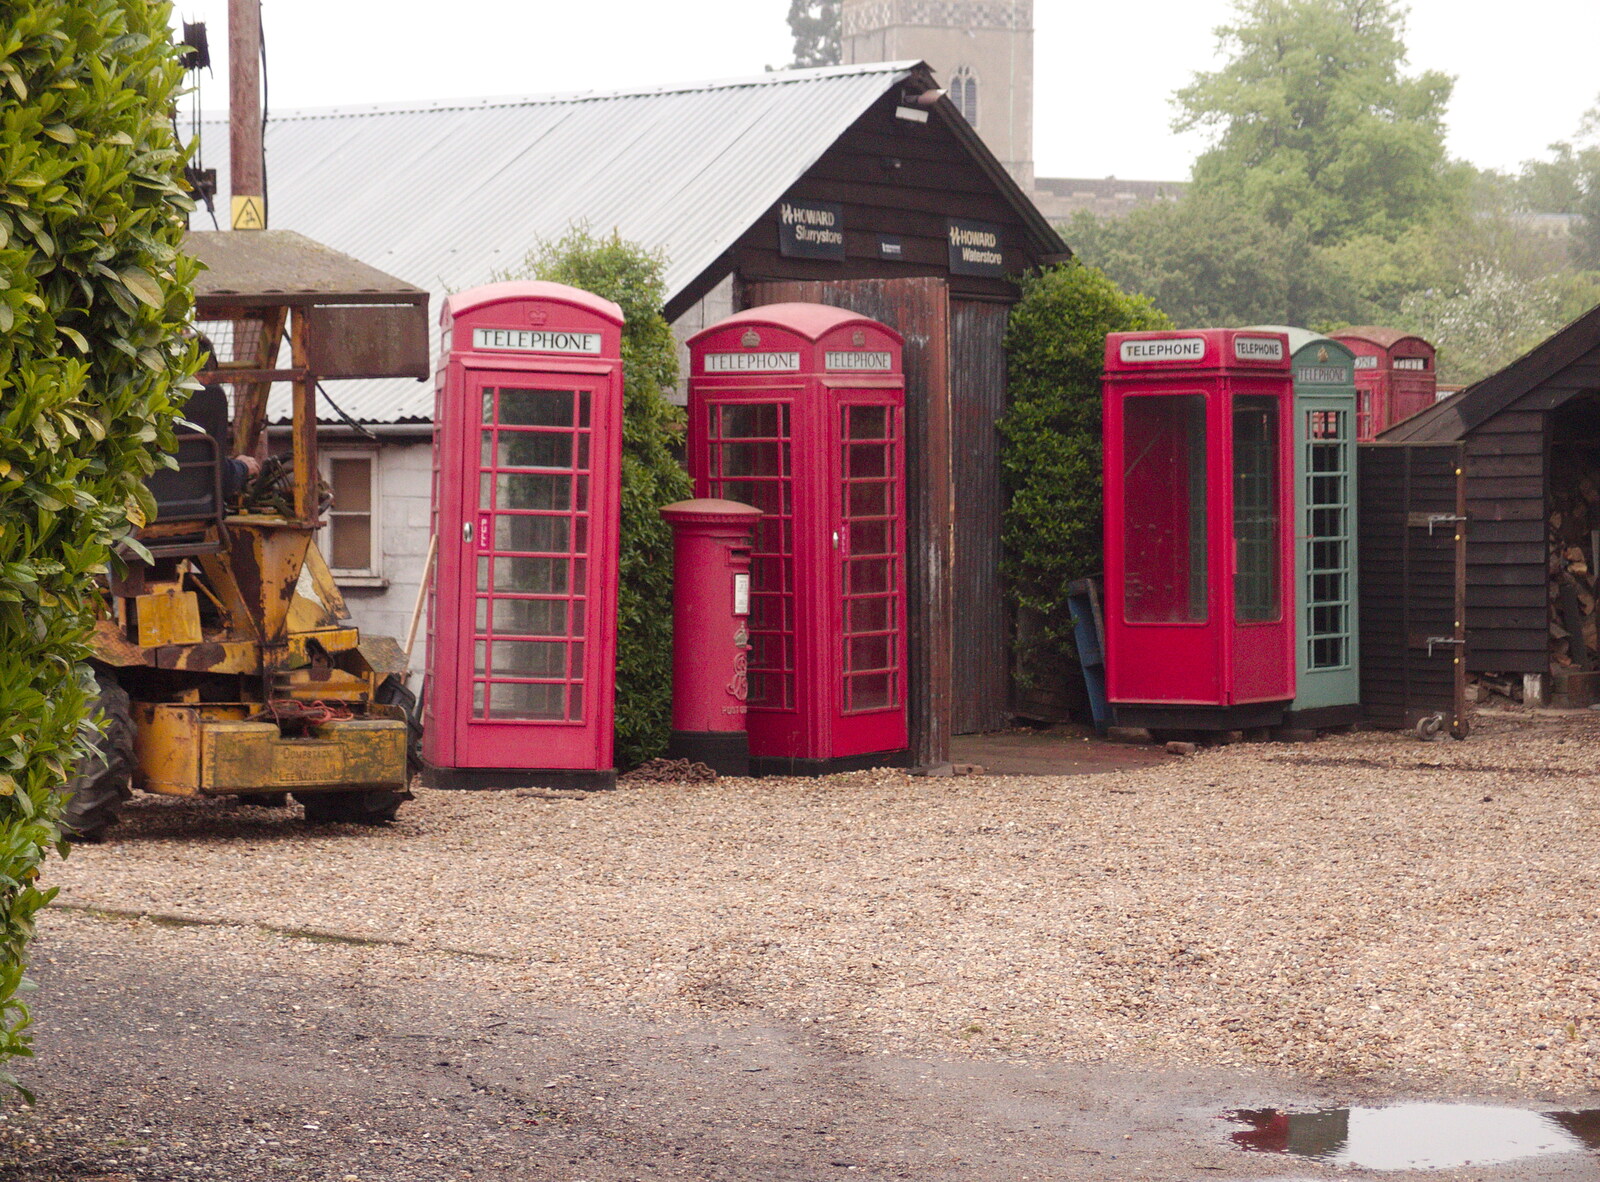 There's an phone-box graveyard near Thelveton from The BSCC at the Burston Crown, and the Oaksmere Re-opens, Brome, Suffolk - 1st May 2014